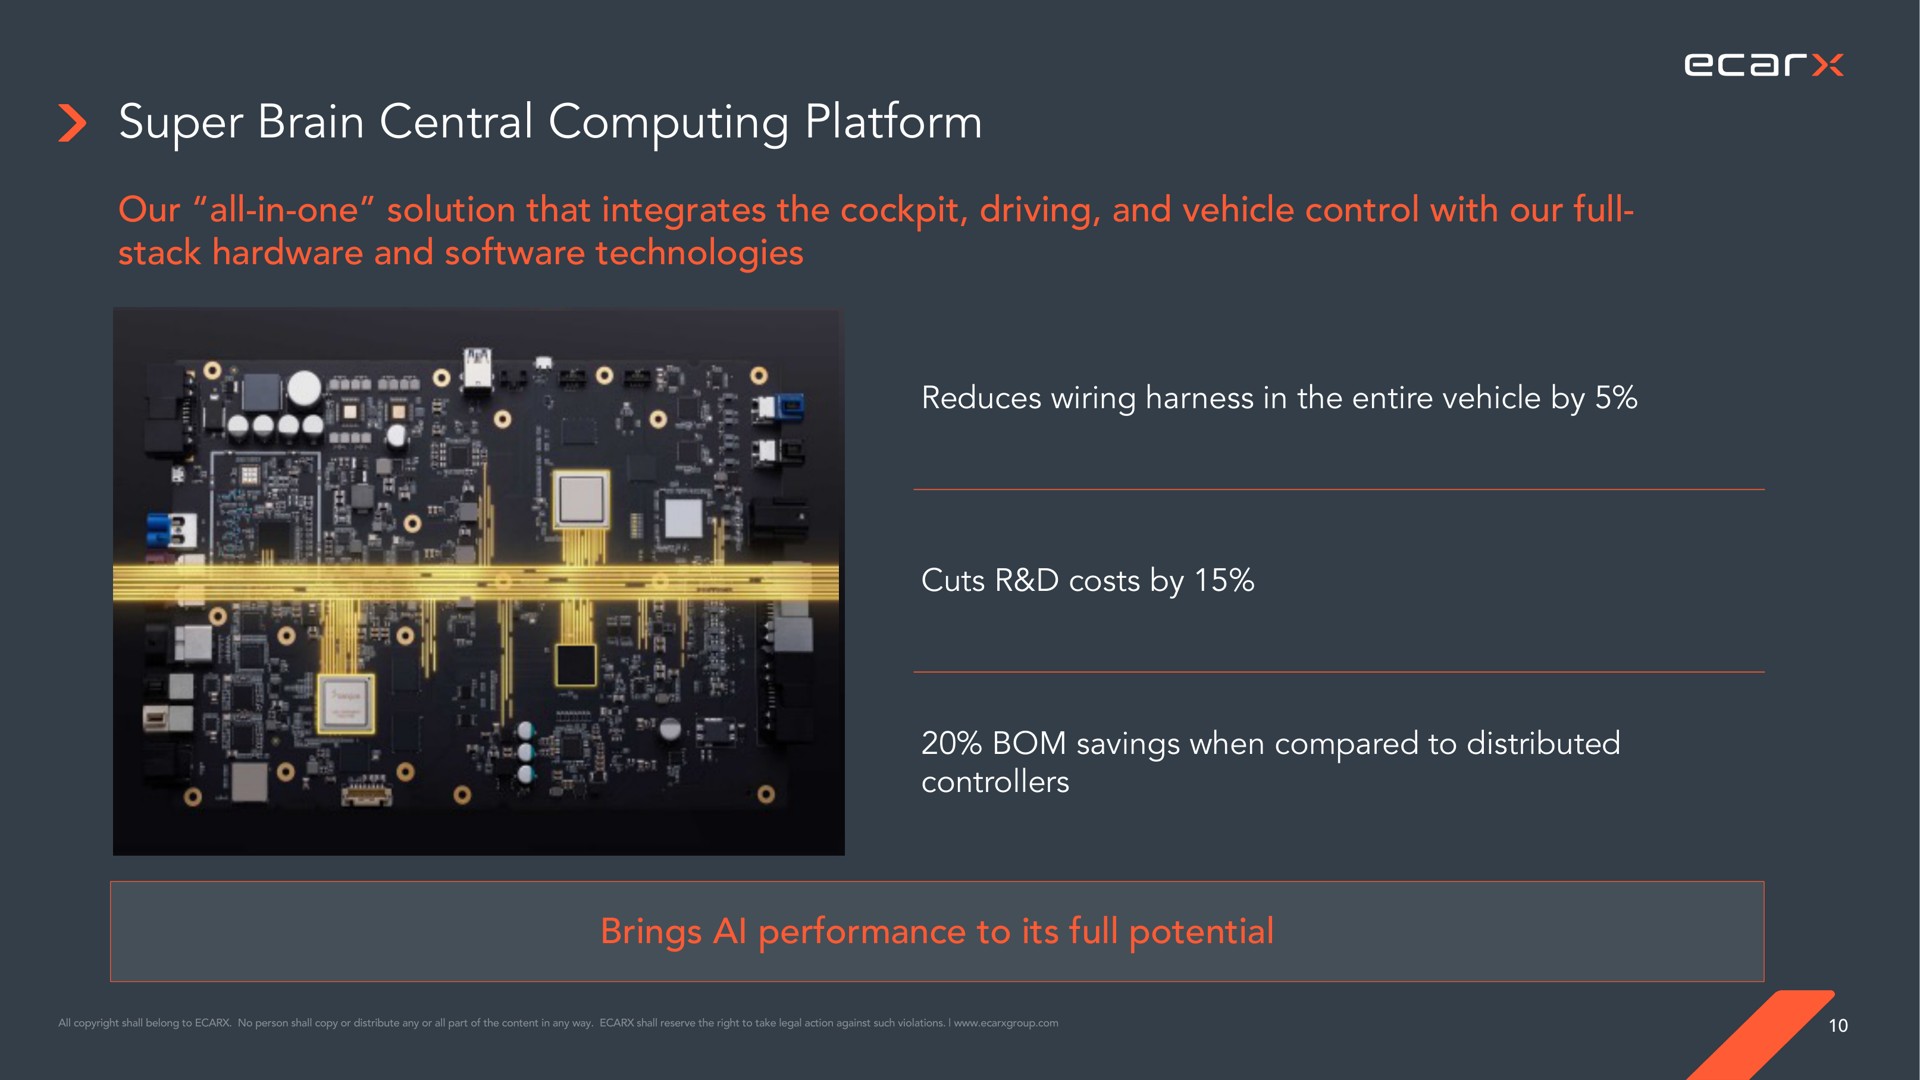 super brain central computing platform our all in one solution that integrates the cockpit driving and vehicle control with our full stack hardware and technologies brings performance to its full potential | Ecarx